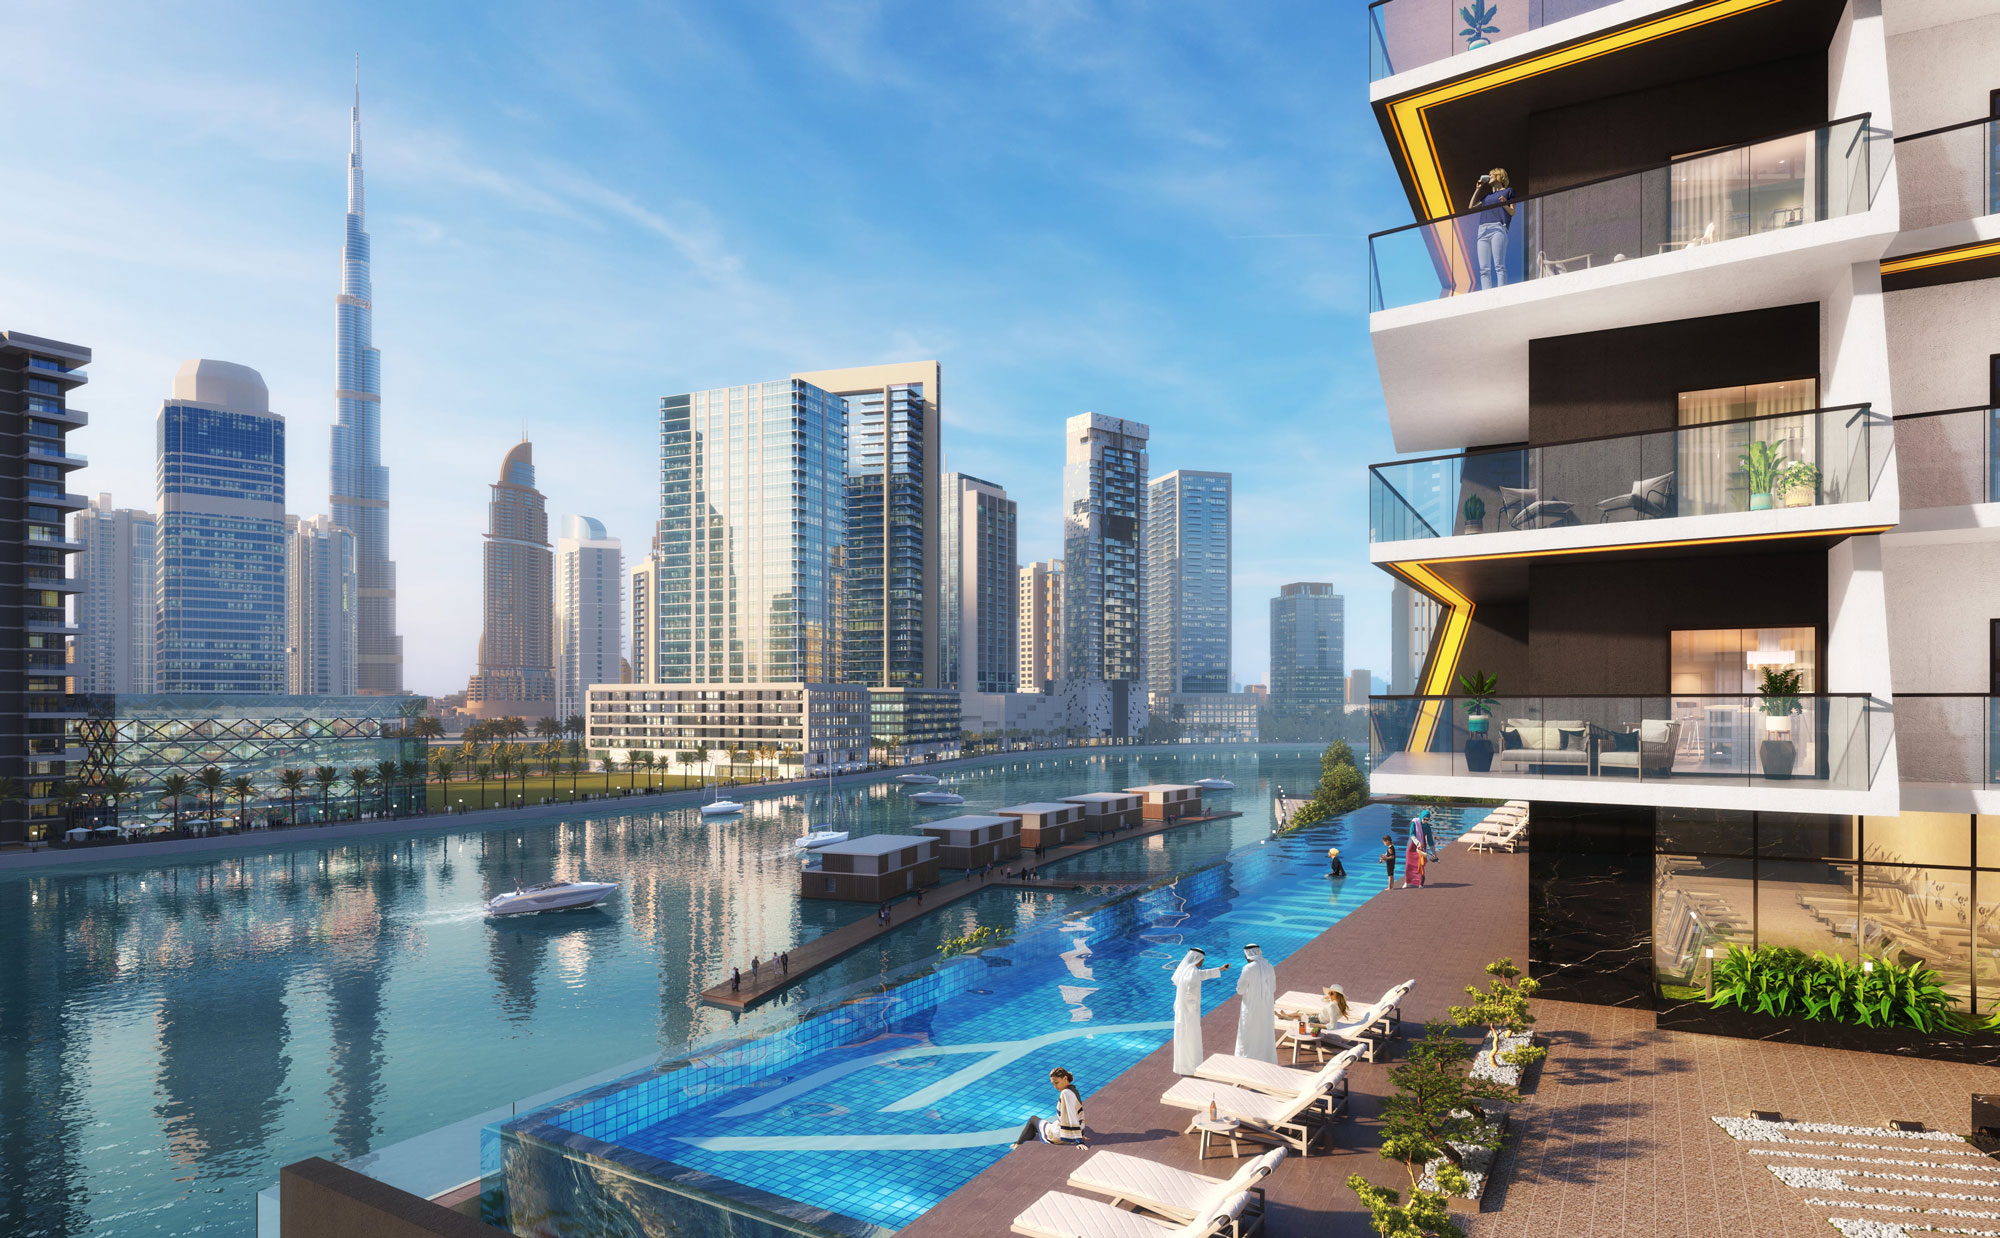 Property for Sale by Binghatti Developers in Dubai – Buying Property from Developer